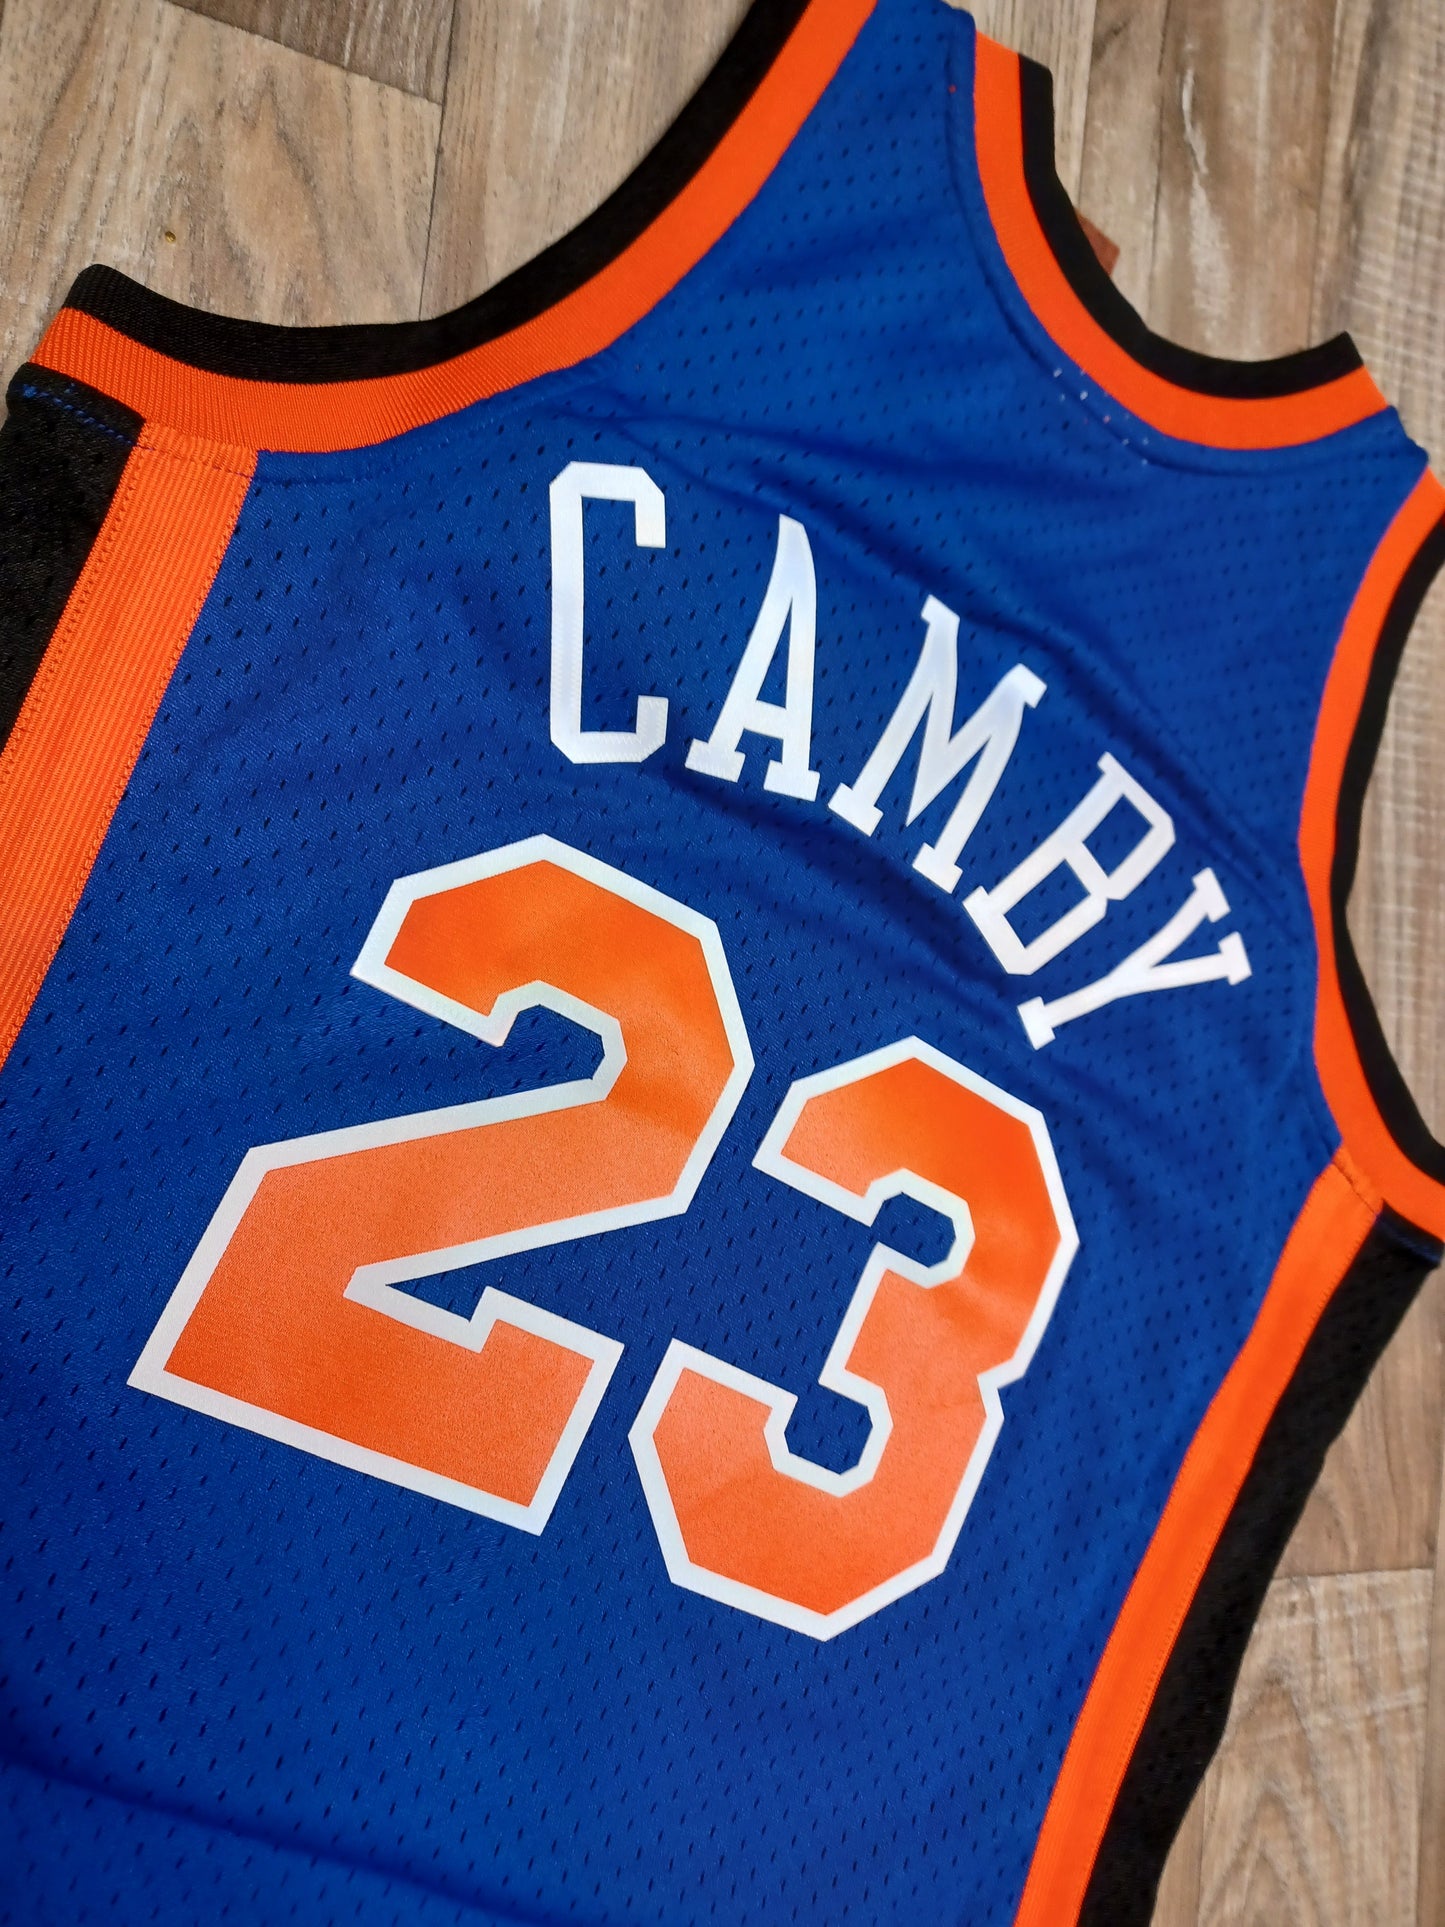 Marcus Camby New York Knicks Jersey Size Small